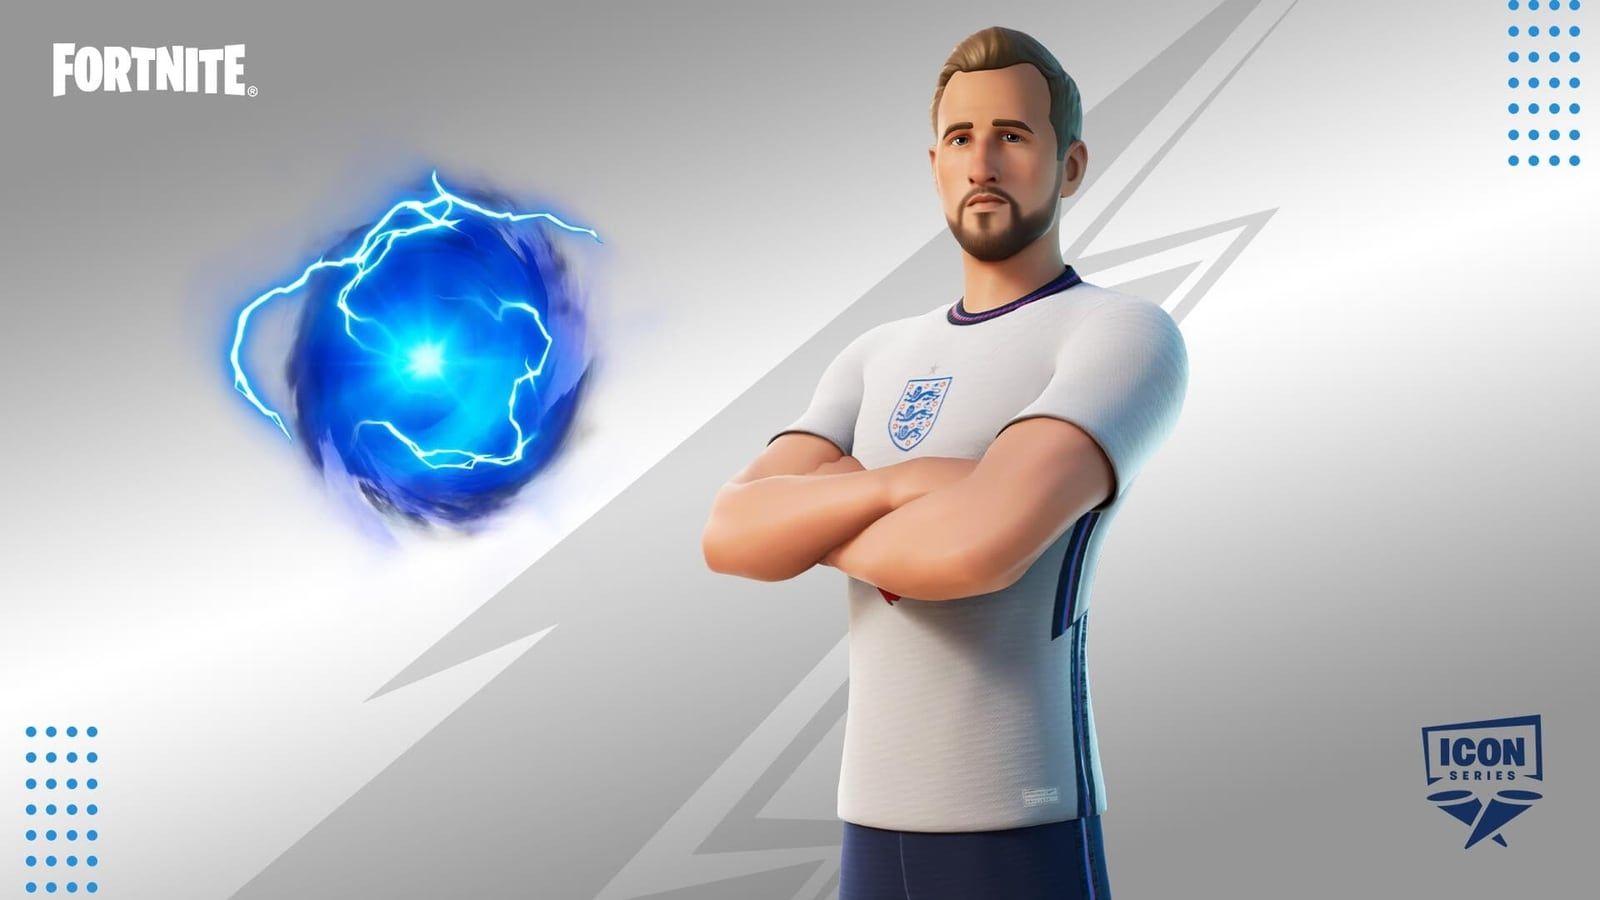 Fortnite Skins: Harry Kane and Marco Reus are now available on Epic Games; check price and more